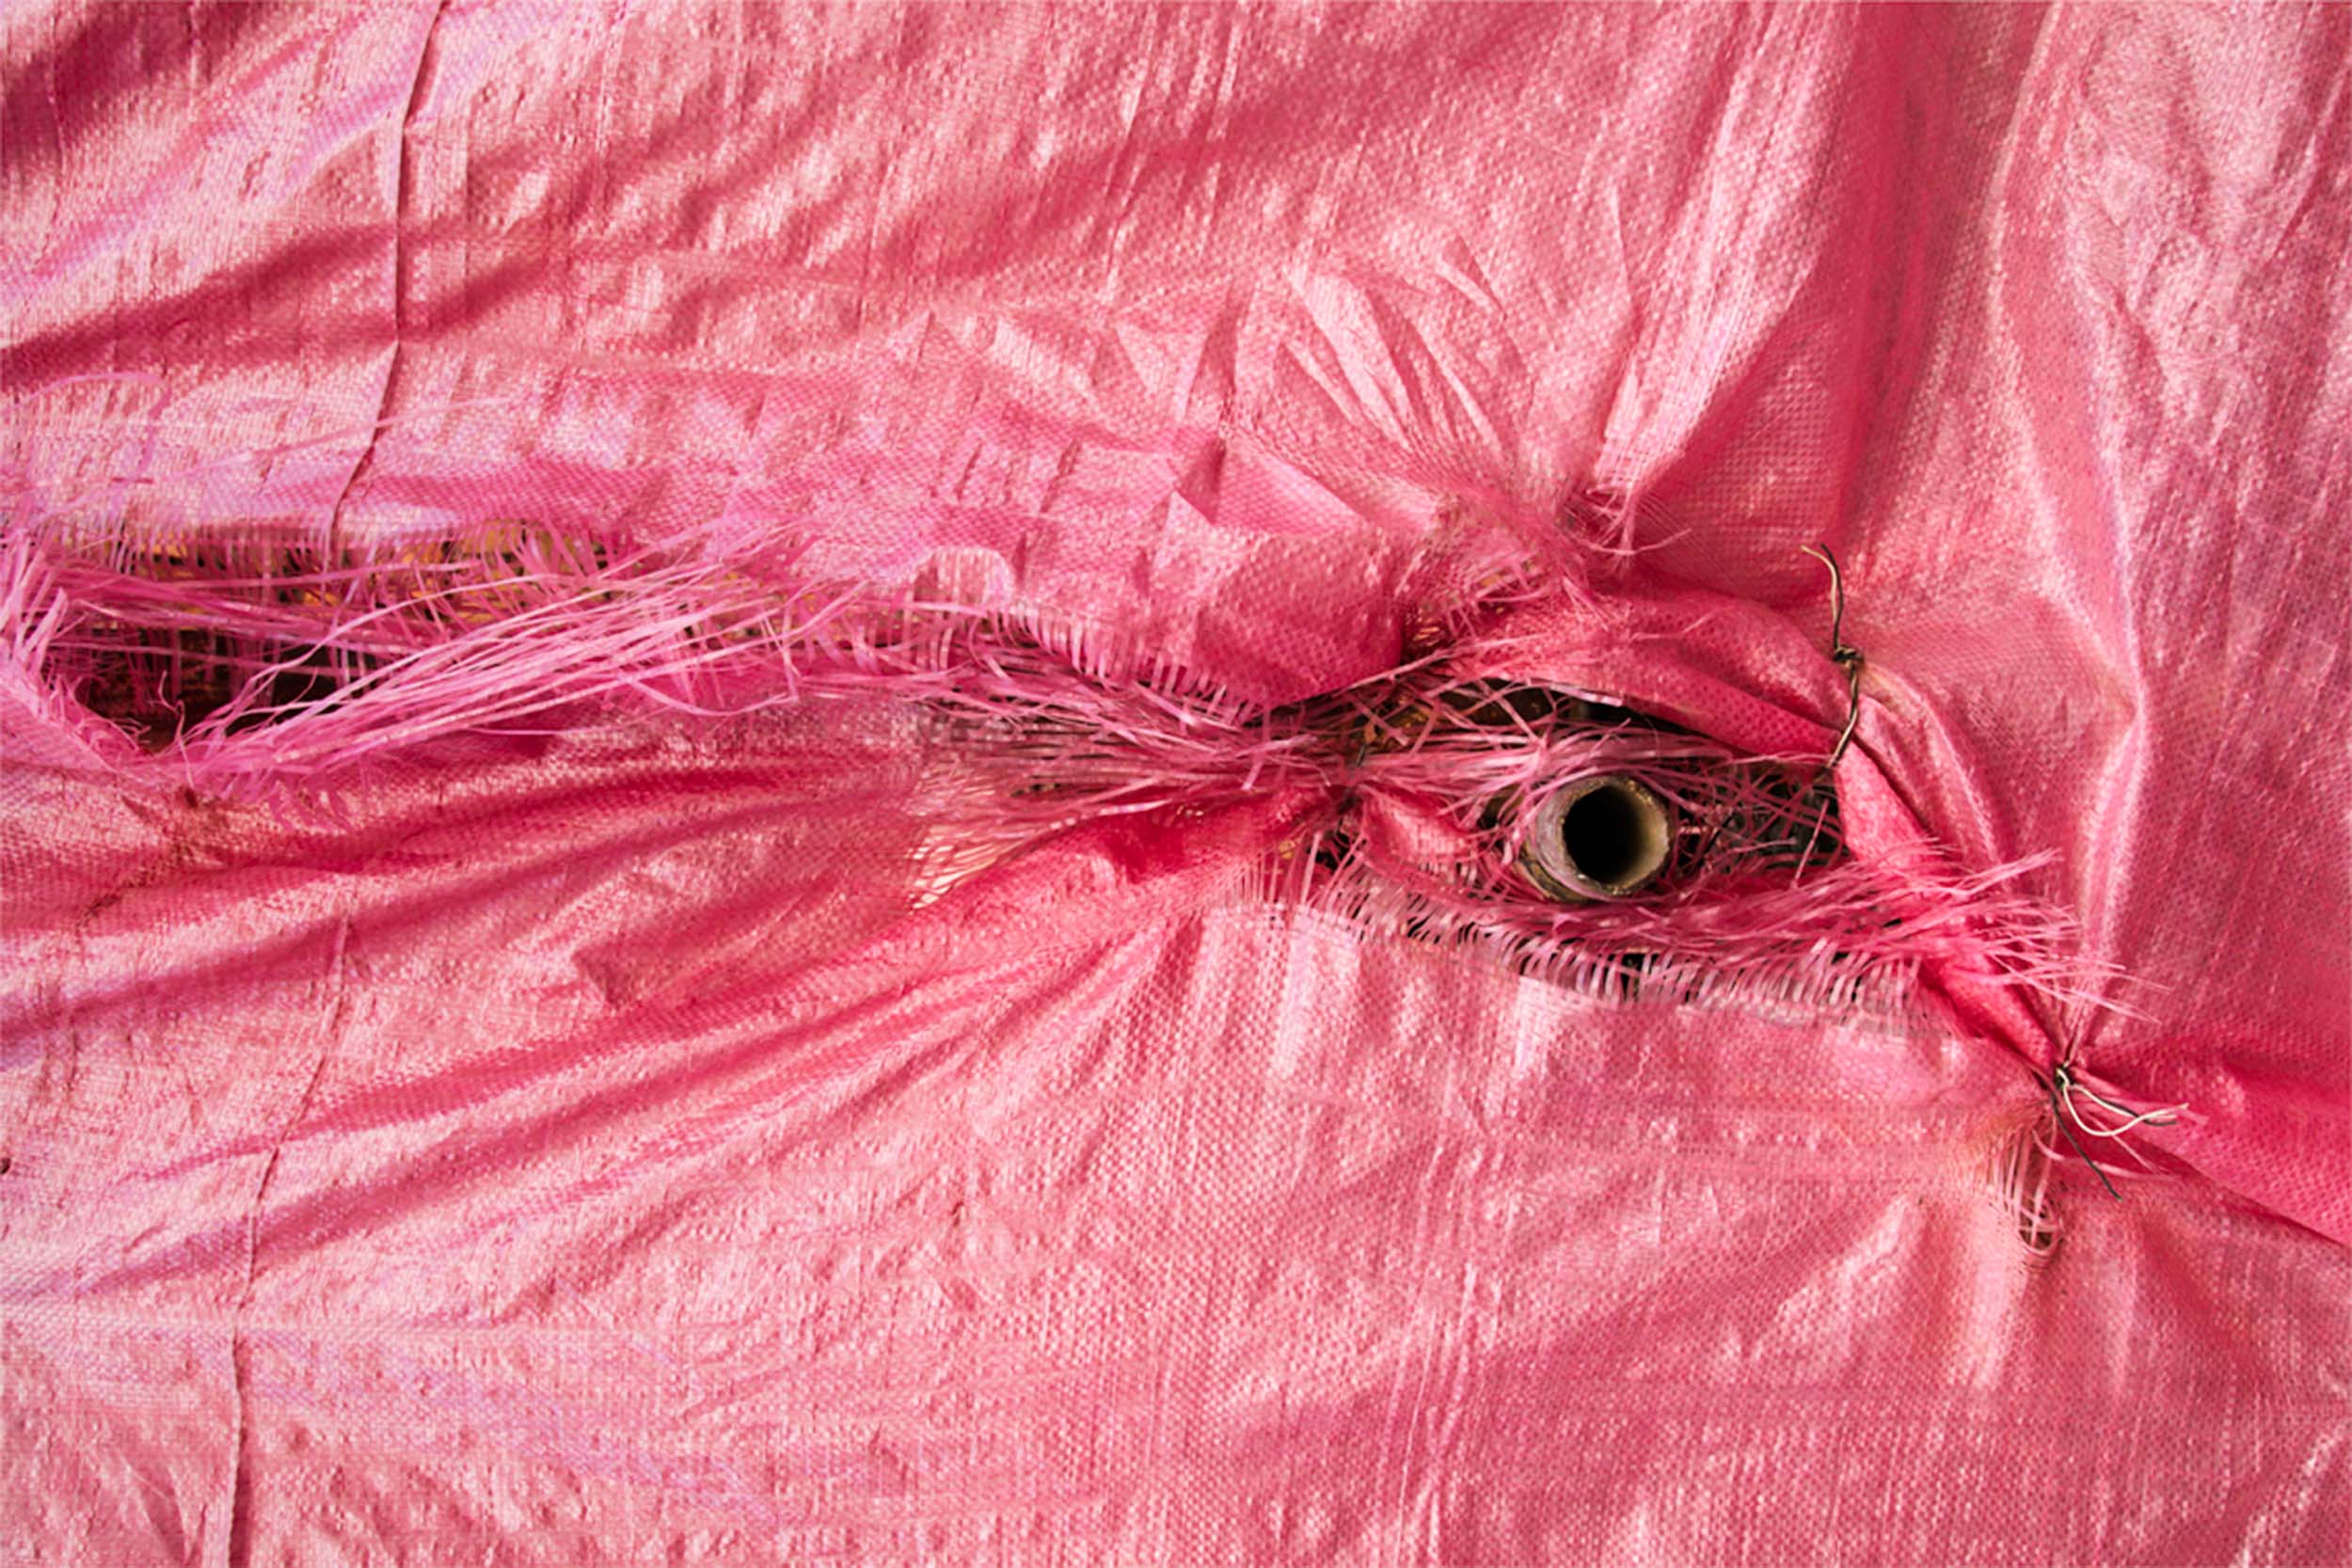 Under cover - Niloufar's work from 2007 to 2012